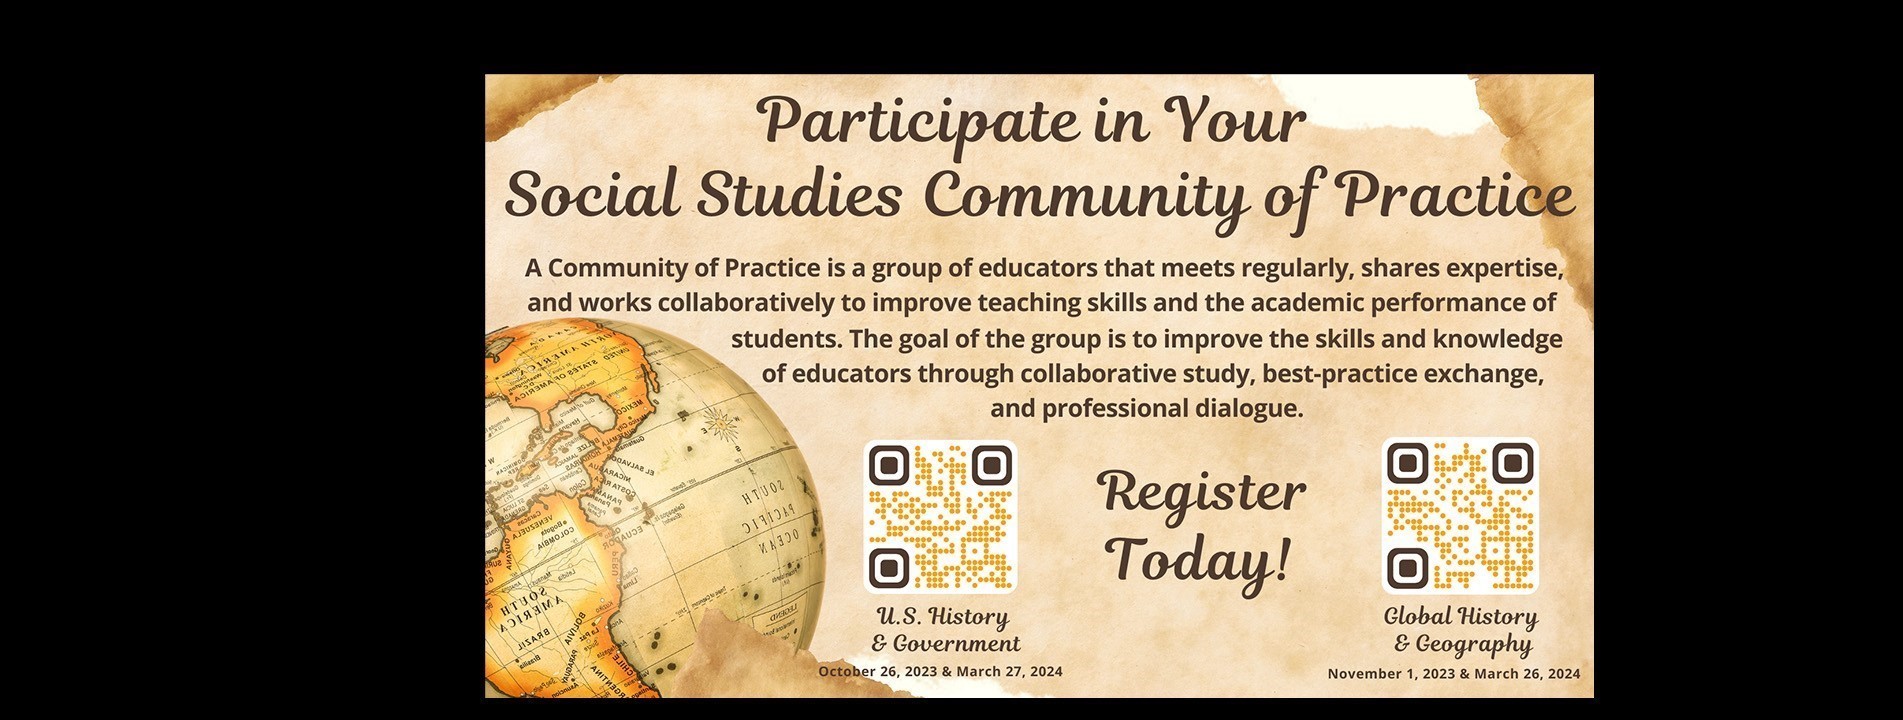 Social Studies Community of Practice. A Community of Practice is a group of educators that meets regularly, shares expertise, and works collaboratively to improve the skills and knowledge of educators through collaborative study, best-practice exchange, and professional dialogue. Register Today - US History & Government October 26, 2023 and March 27, 2024 or Global History & Geography November 1, 2023 and March 26, 2024